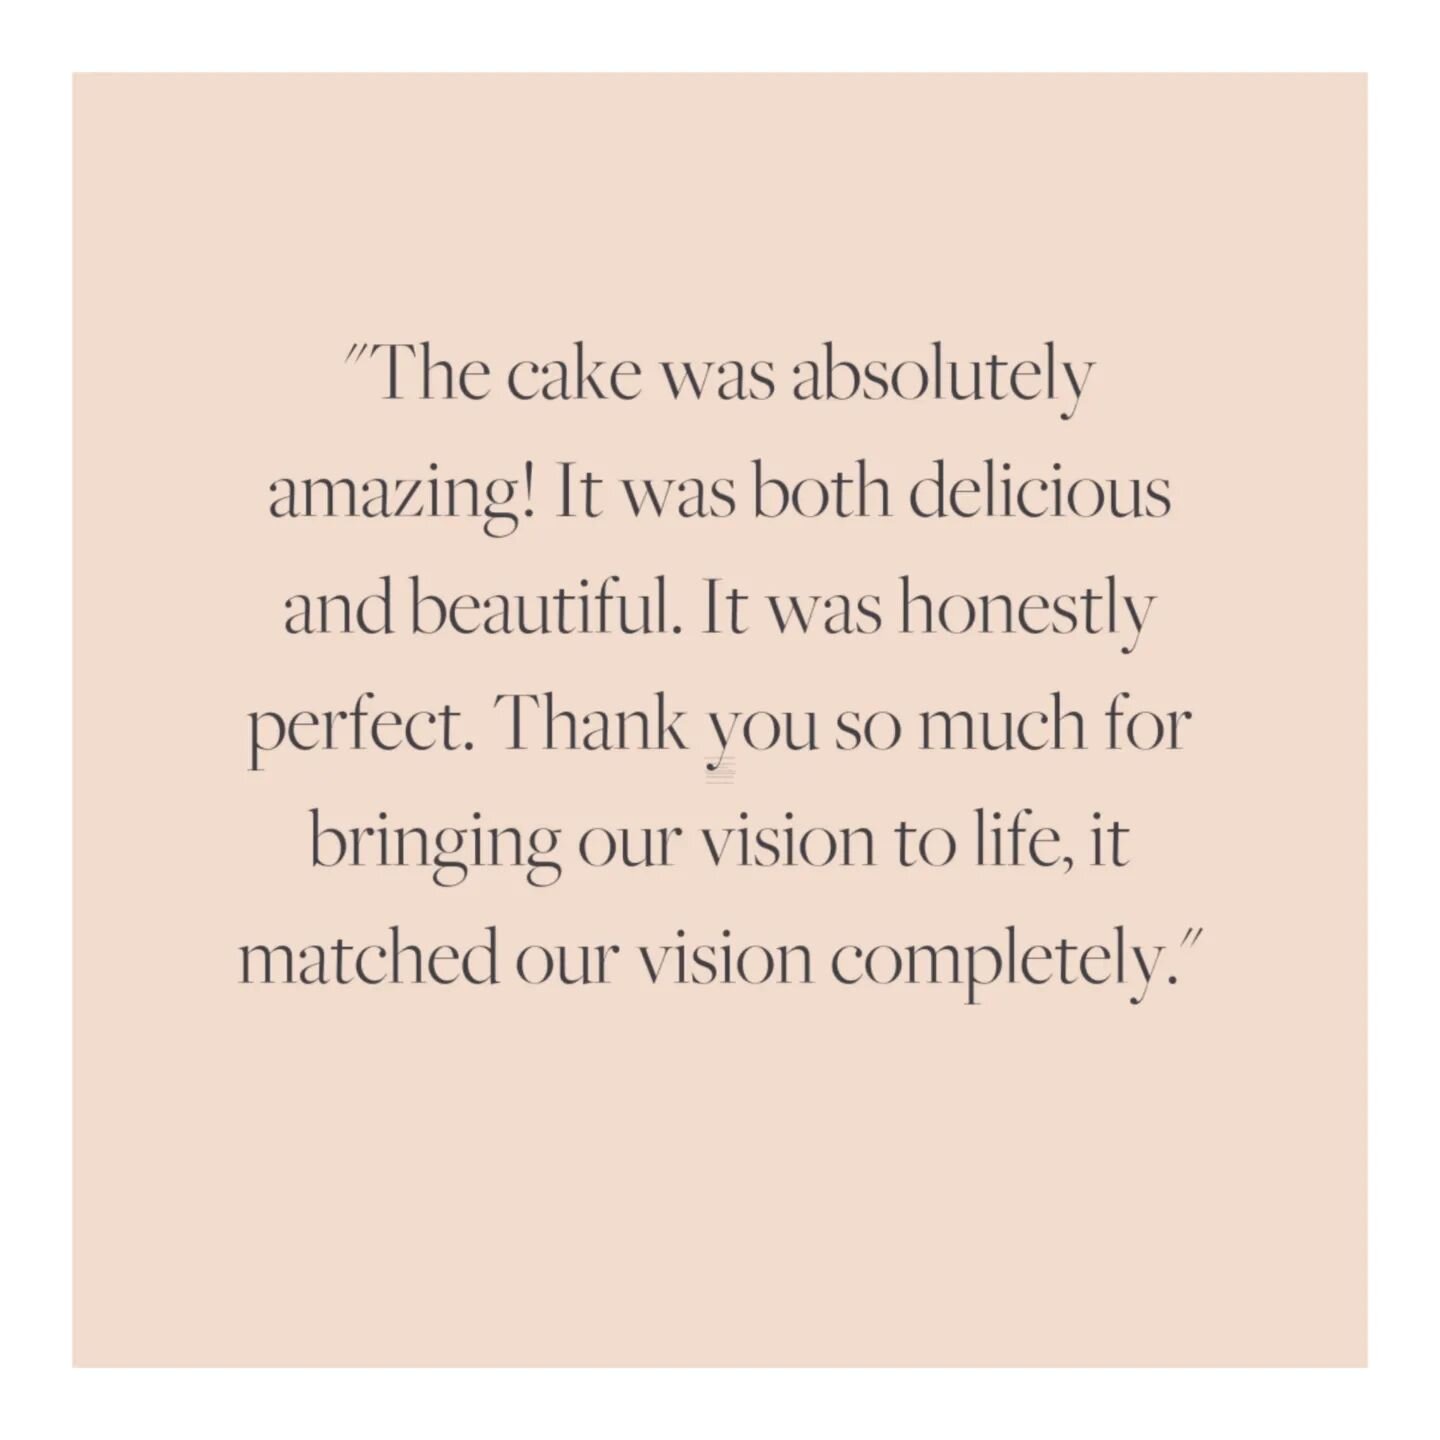 It honestly means so much to receive feedback like this, always so grateful. 🧡

It's been a very busy few weeks and I can't wait to show you some of this season's wedding projects. There have been so many beautiful, striking and personal designs ove